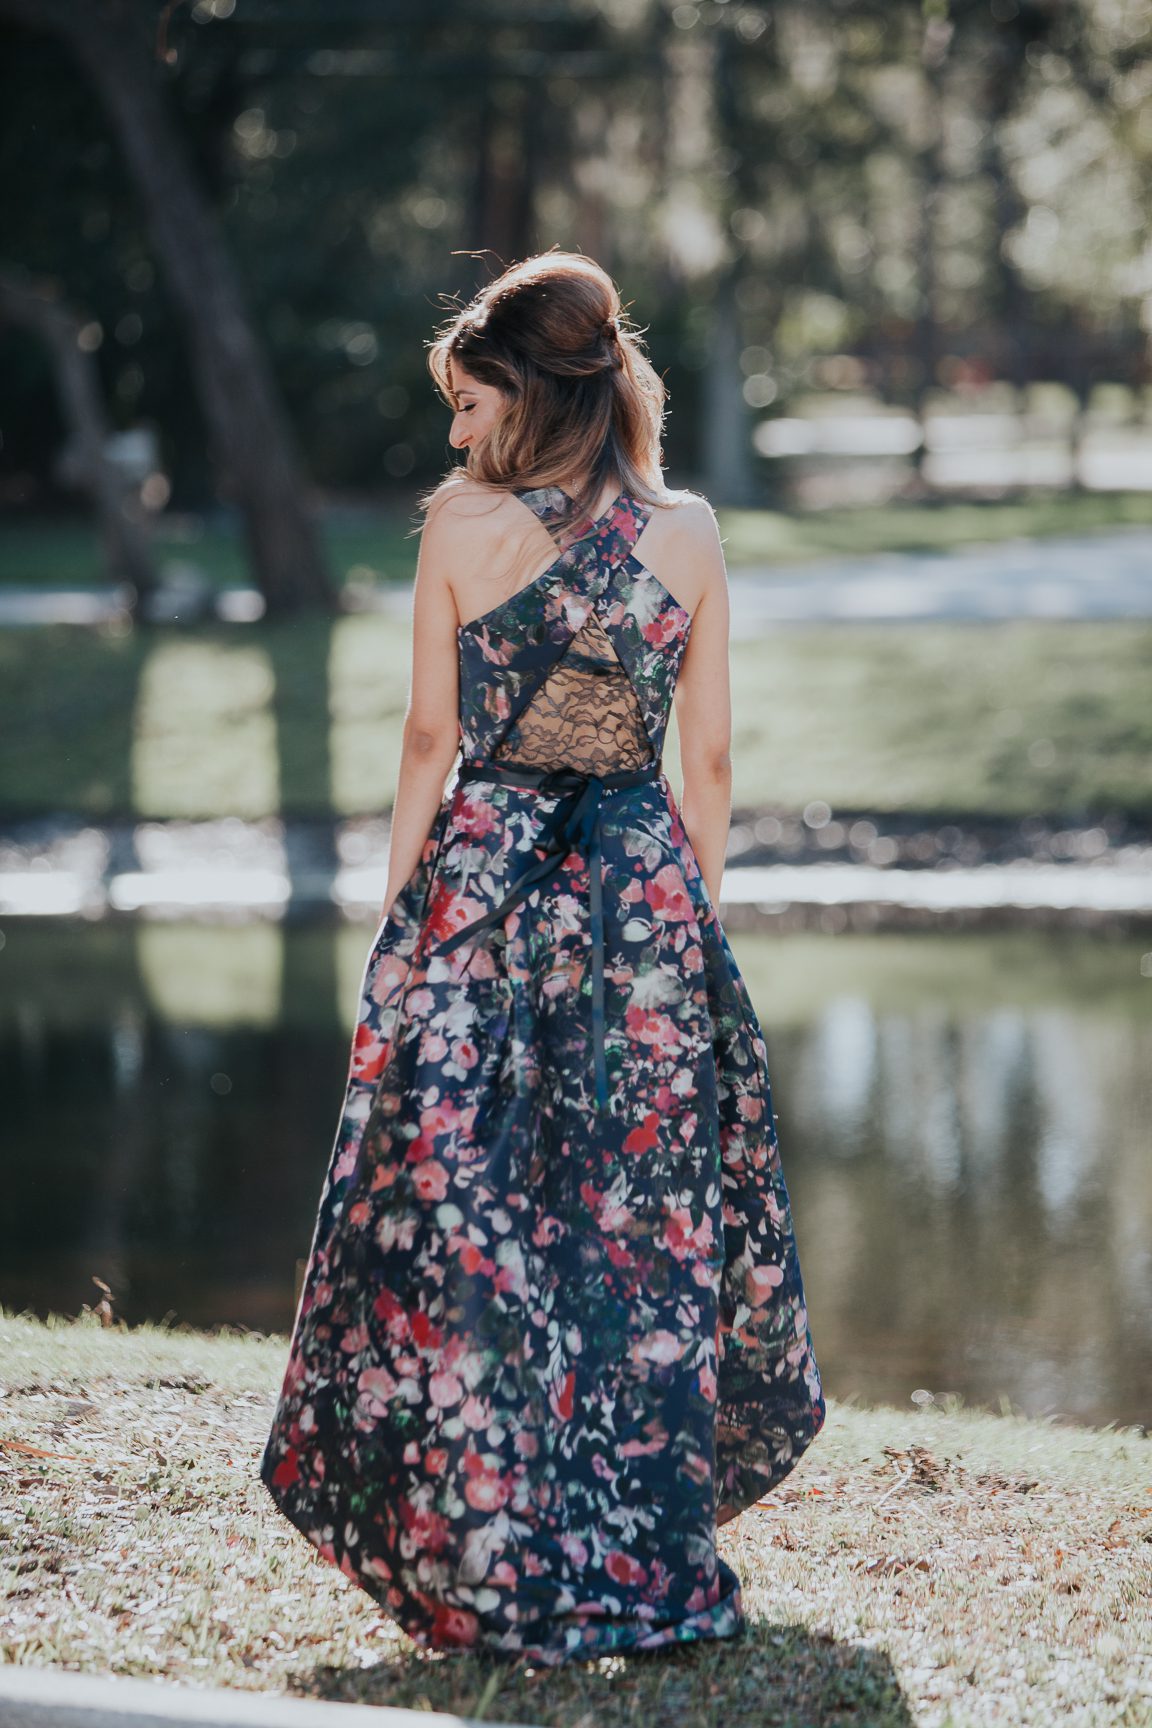 bride to be in flowered gown by lake